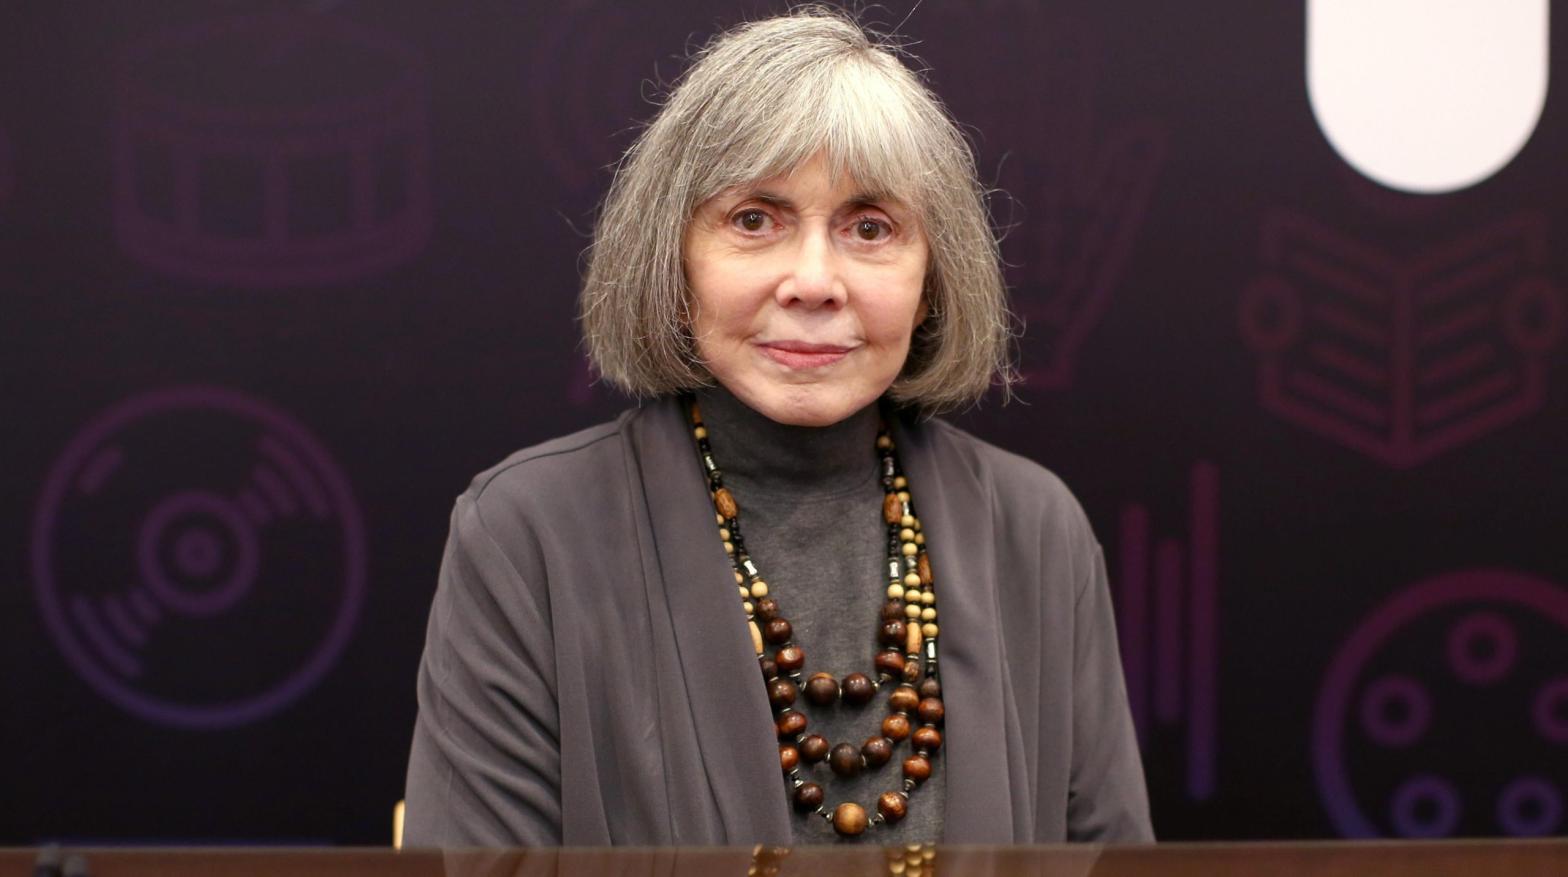 Author Anne Rice at Entertainment Weekly's PopFest on October 29, 2016, in Los Angeles.  (Image: Joe Scarnici, Getty Images)